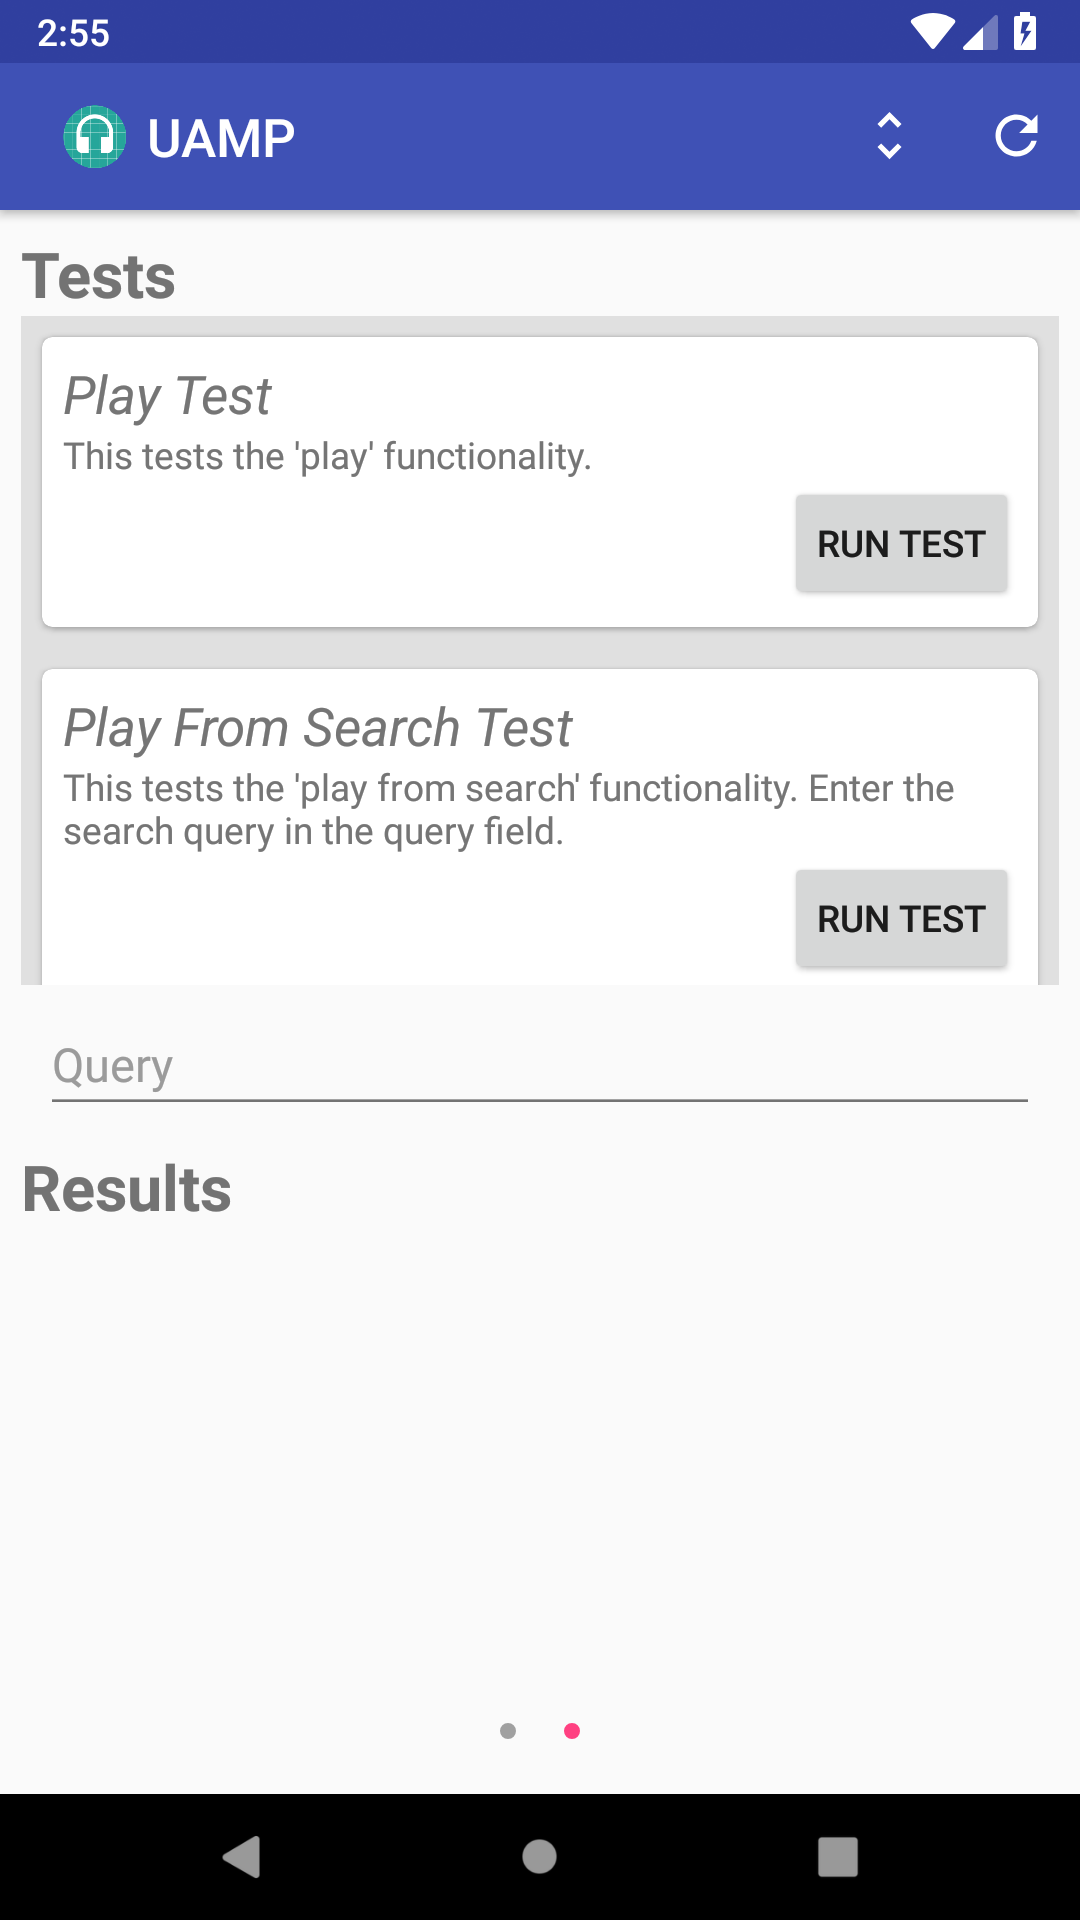 The Test Selection Page